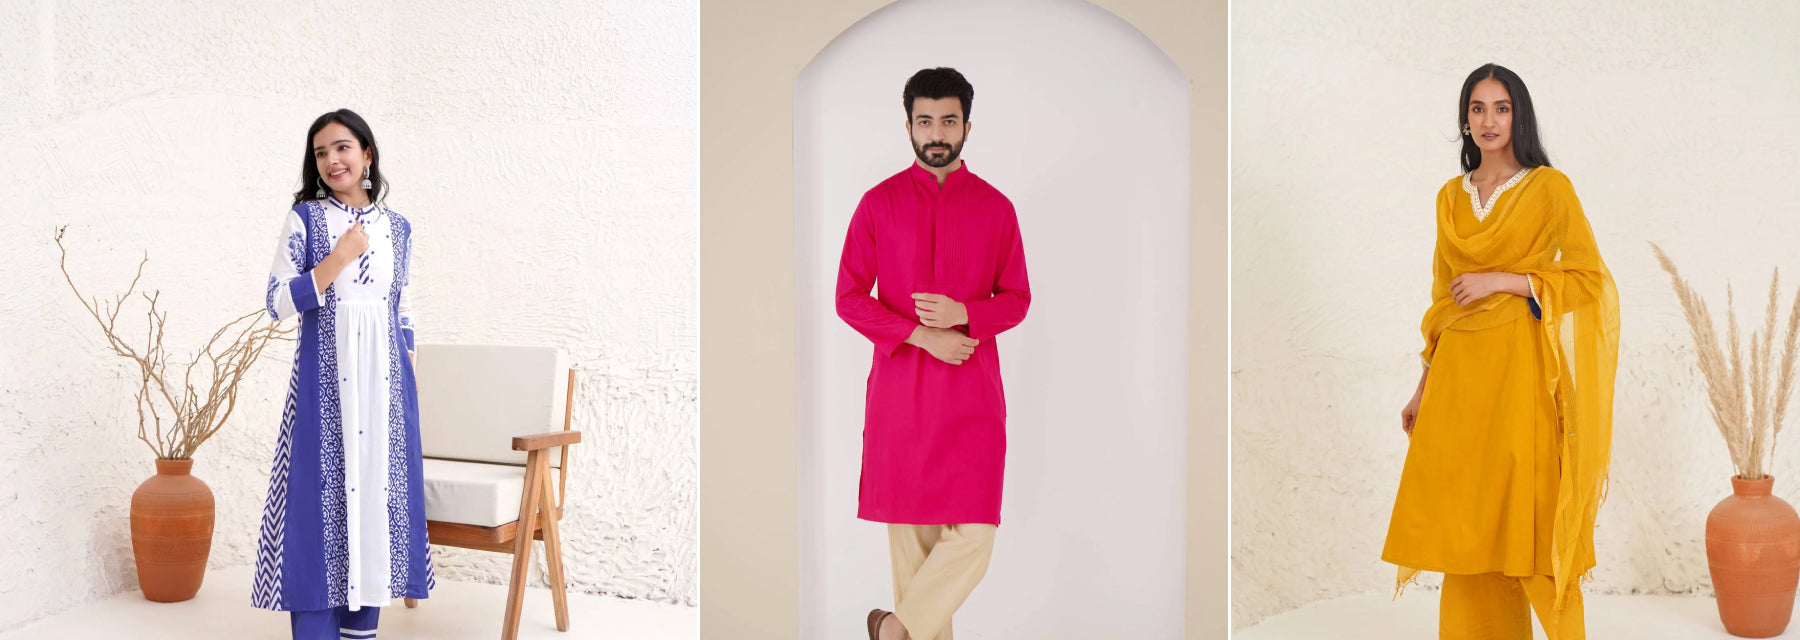 How to Match with Your Partner This Diwali: Stylish Matching Outfits from Nero India